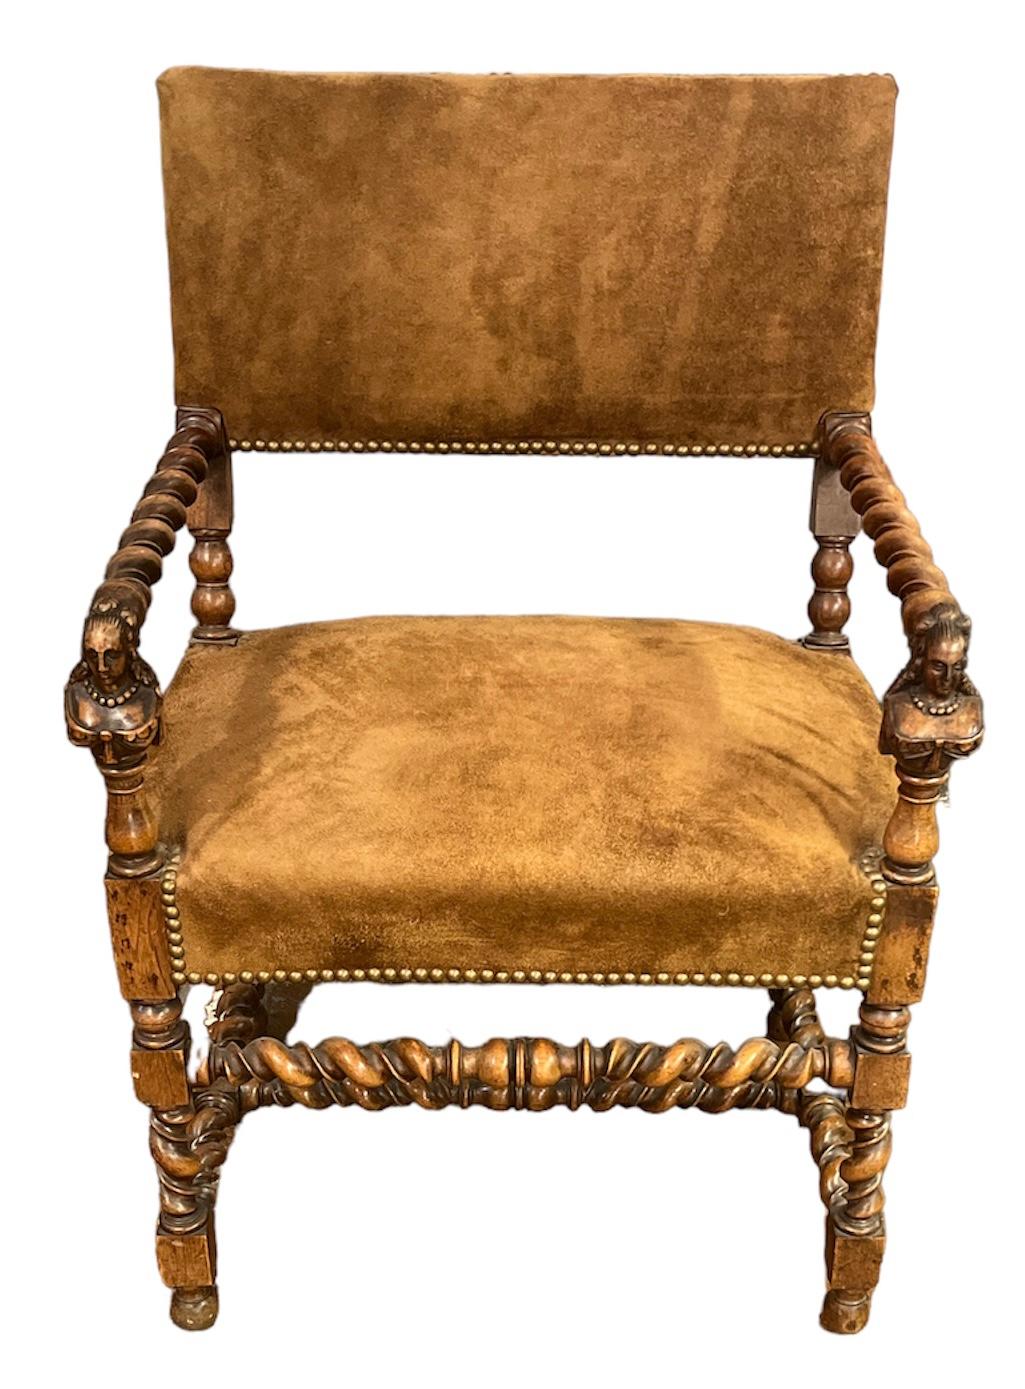 Pair of Early 19thc English Hand Carved Barley Twist And Suede Arm Chairs In Good Condition For Sale In Pasadena, CA